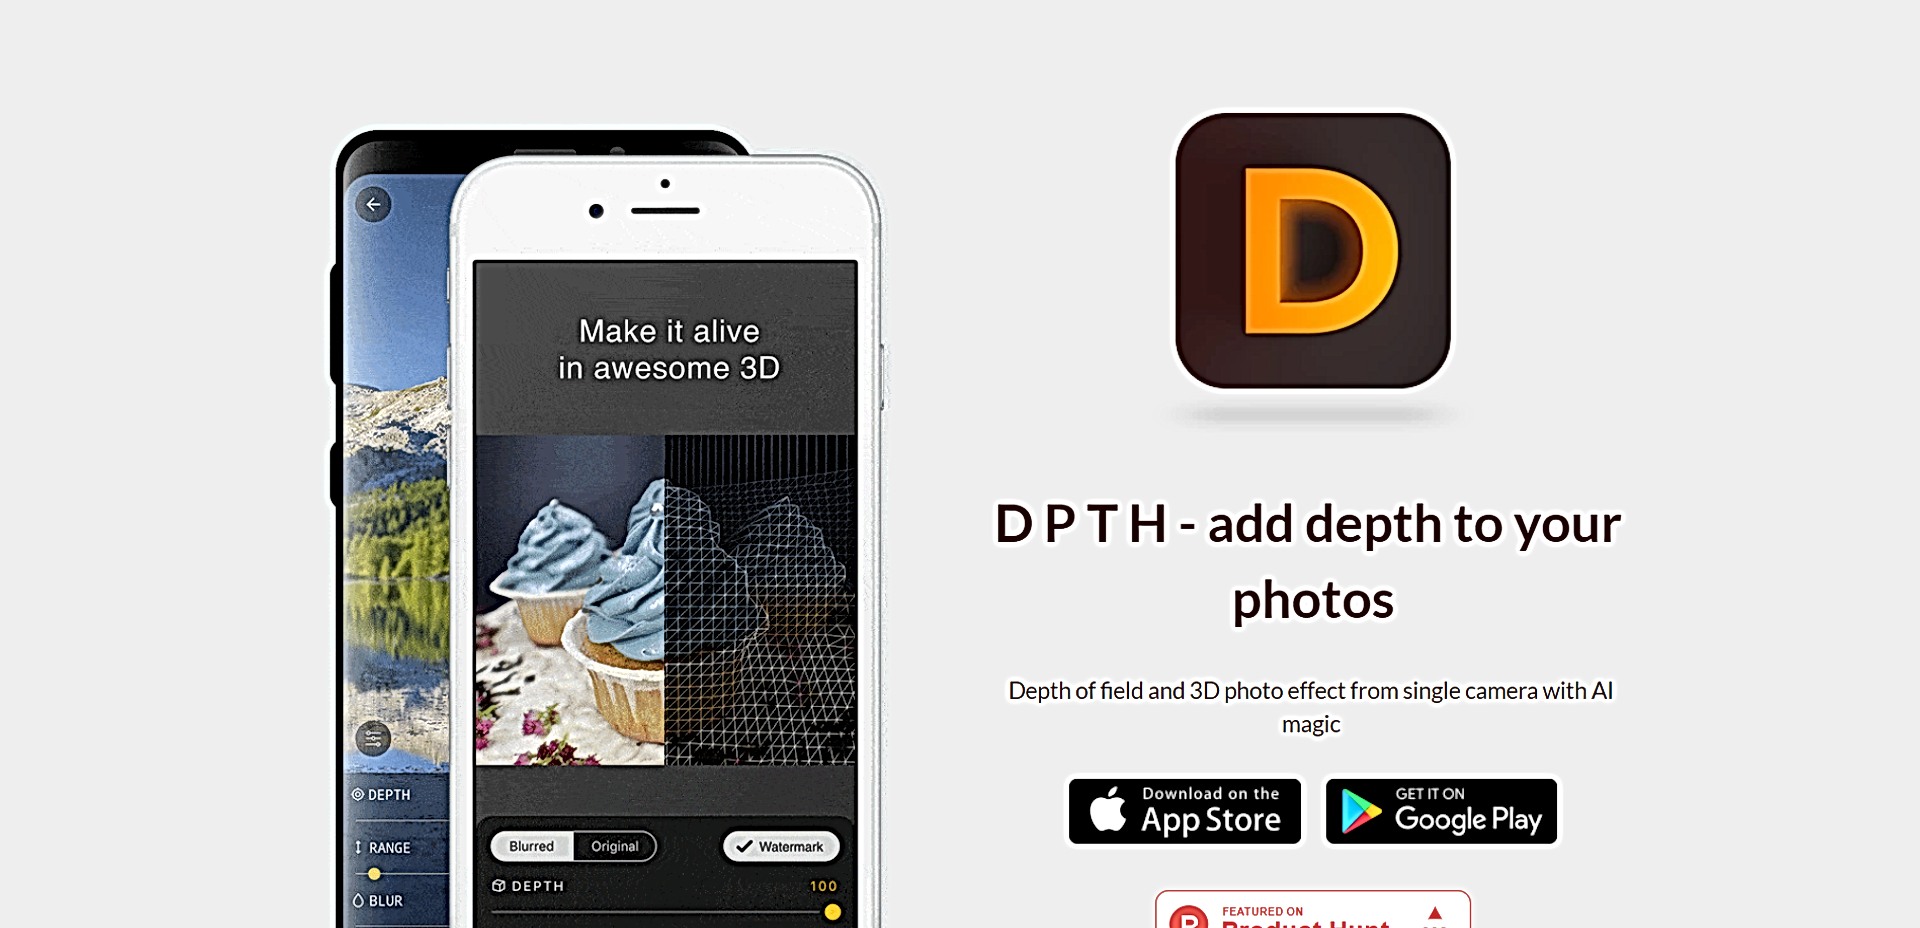 DPTH featured